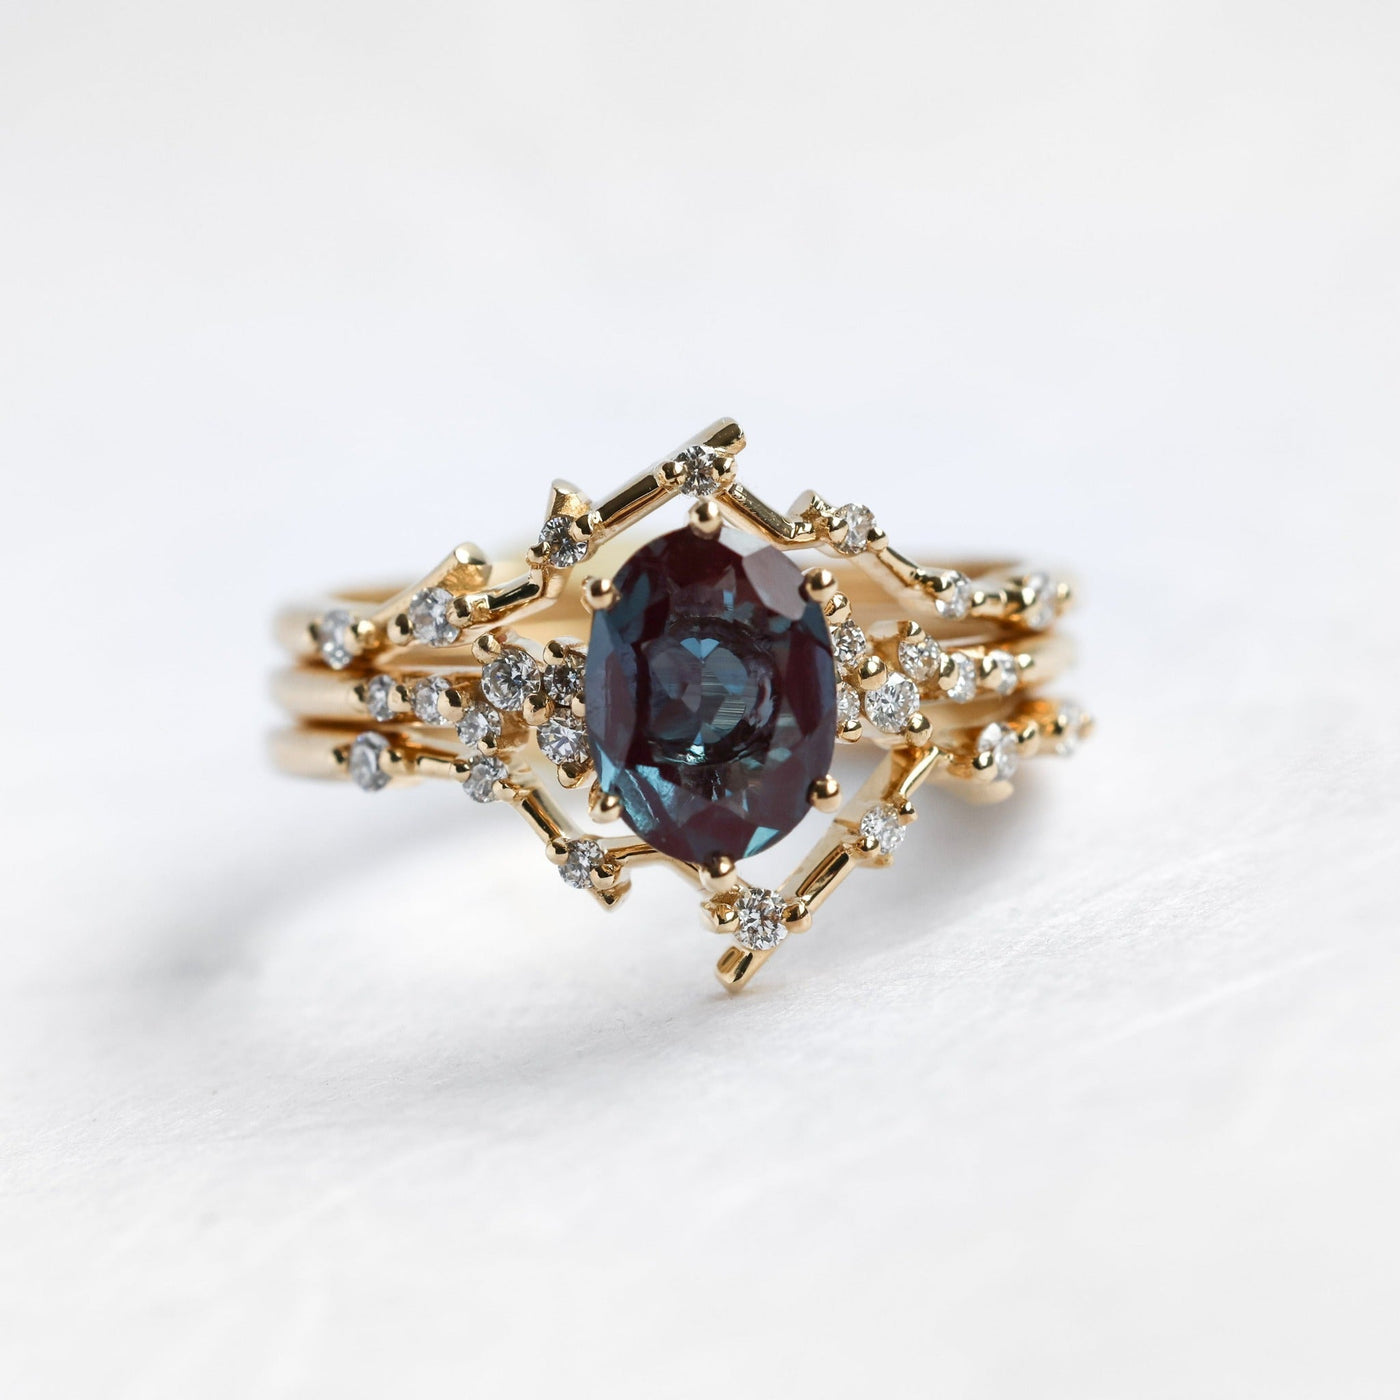 Oval Alexandrite Ring Set with Upper and Lower Bands holding Round White Diamonds